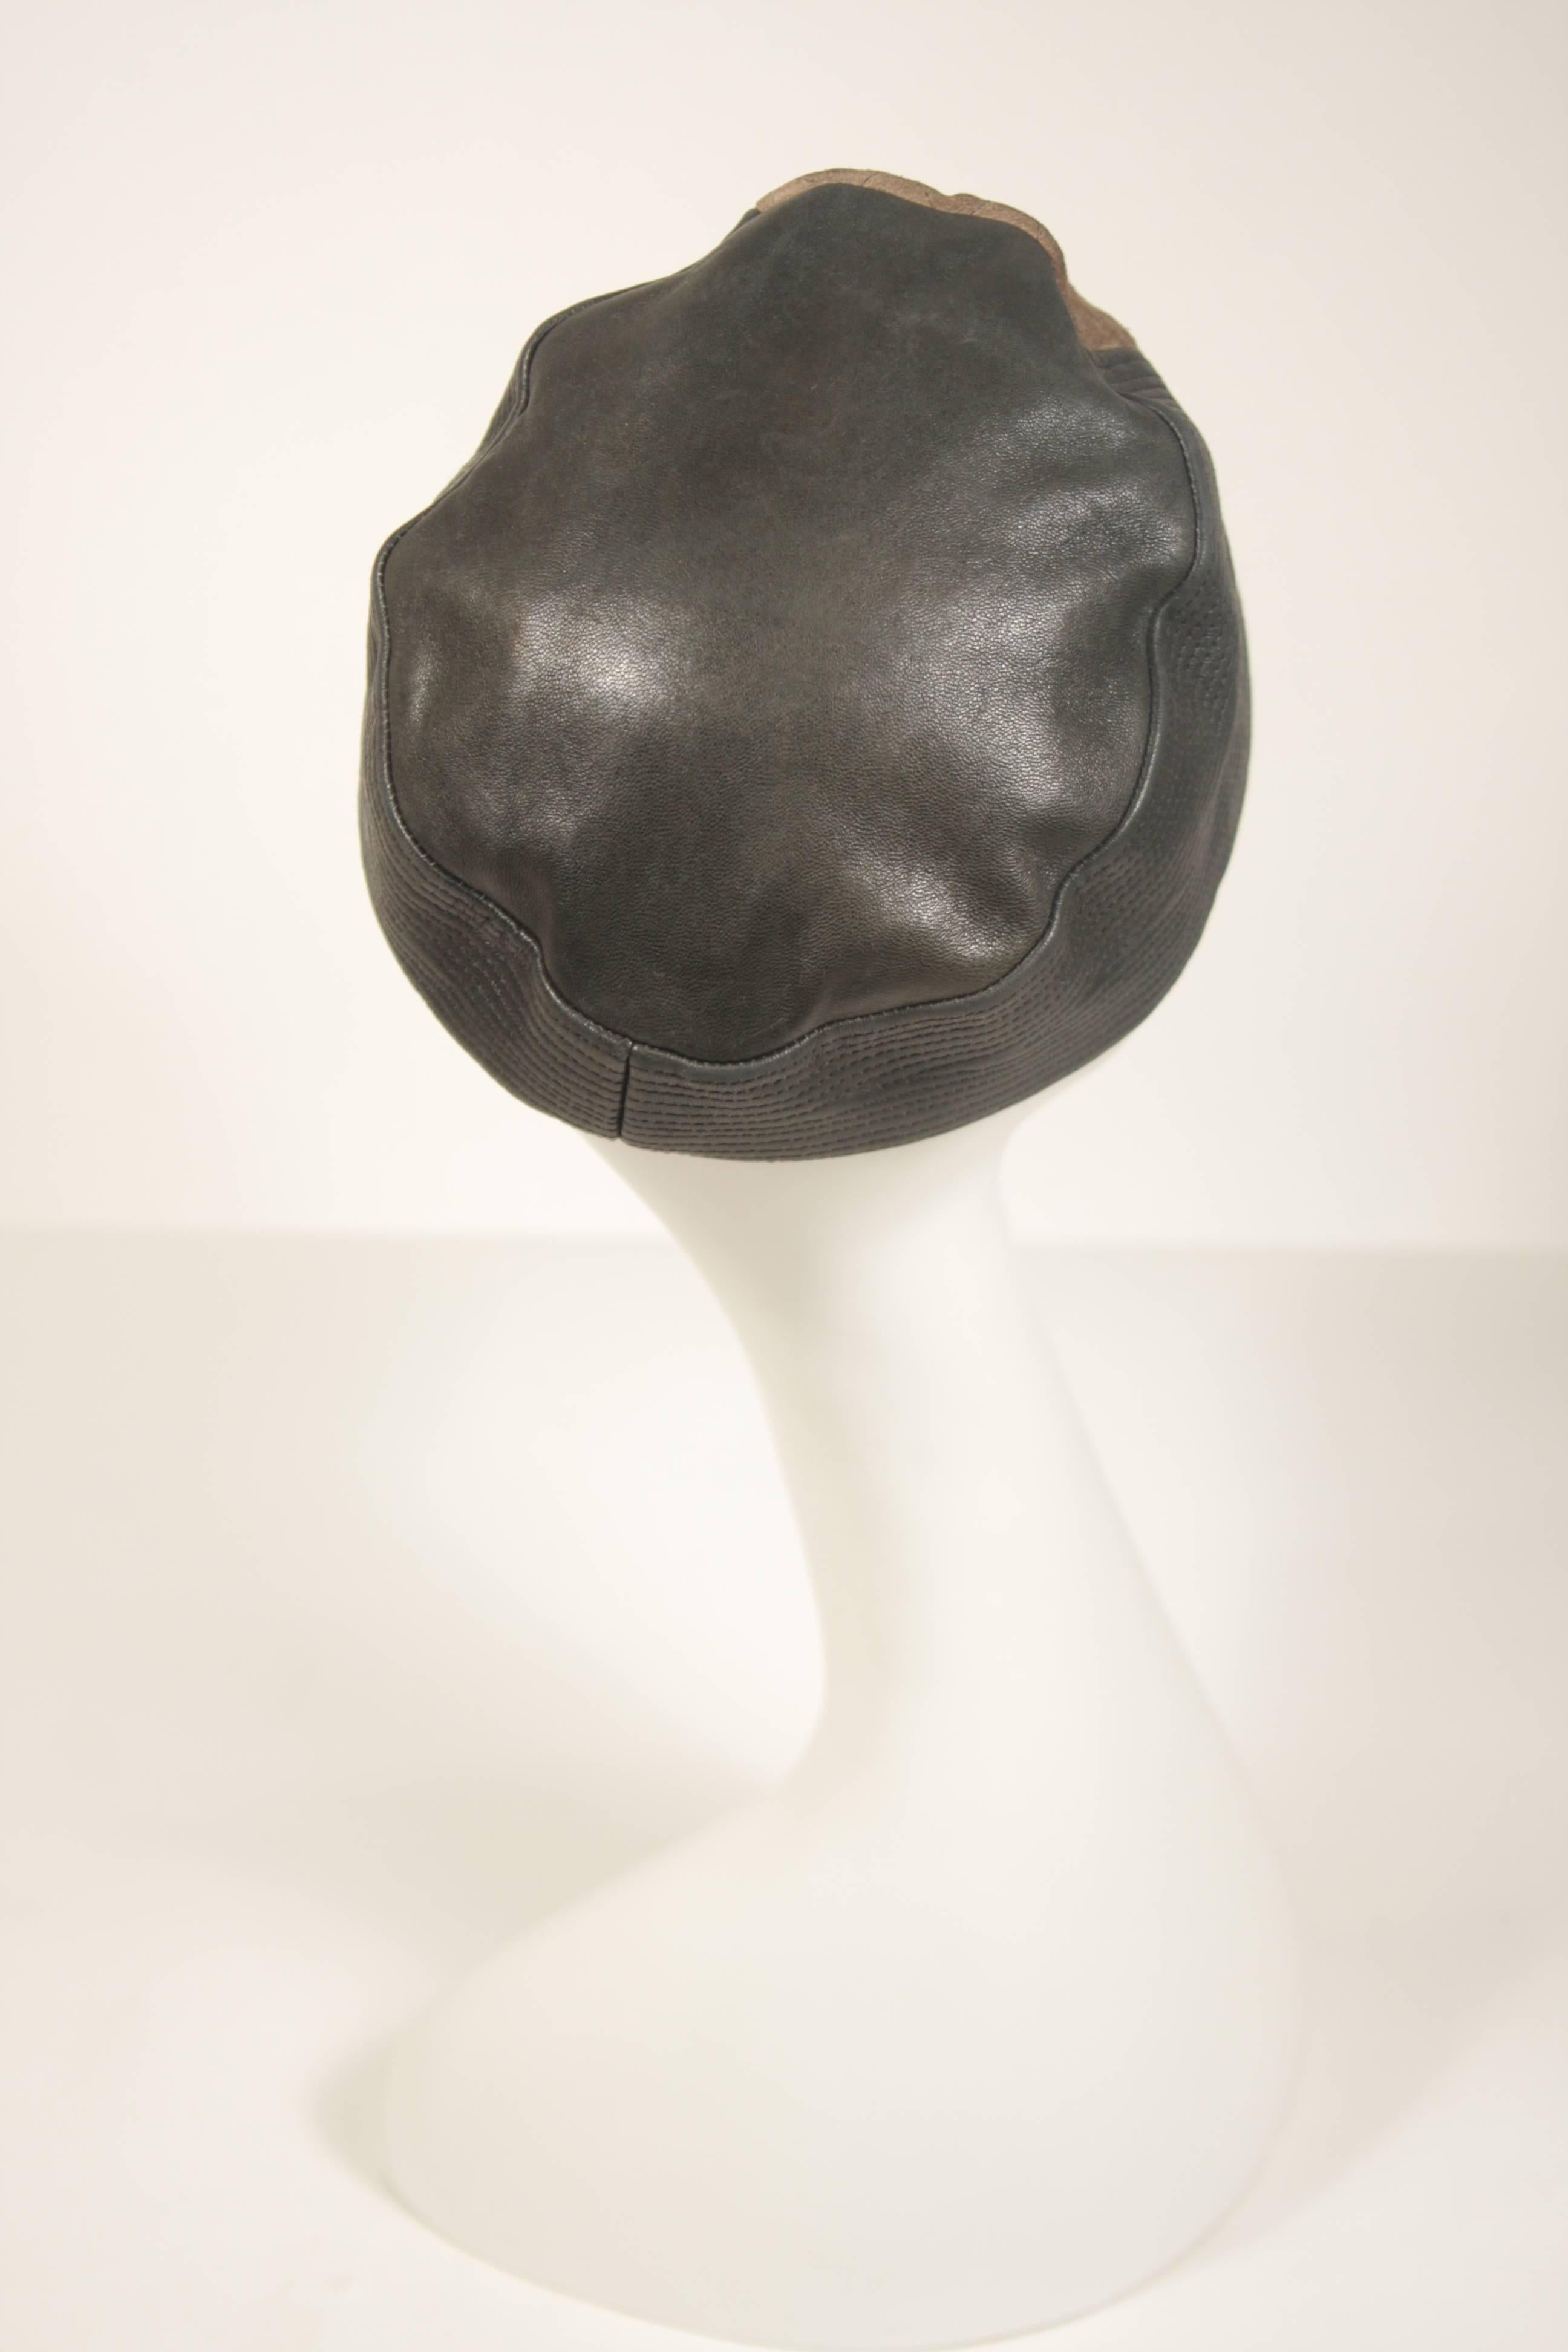 YVES SAINT LAURENT RIVE GAUCHE Suede and Leather Hat with Top Stitch Details In Excellent Condition For Sale In Los Angeles, CA